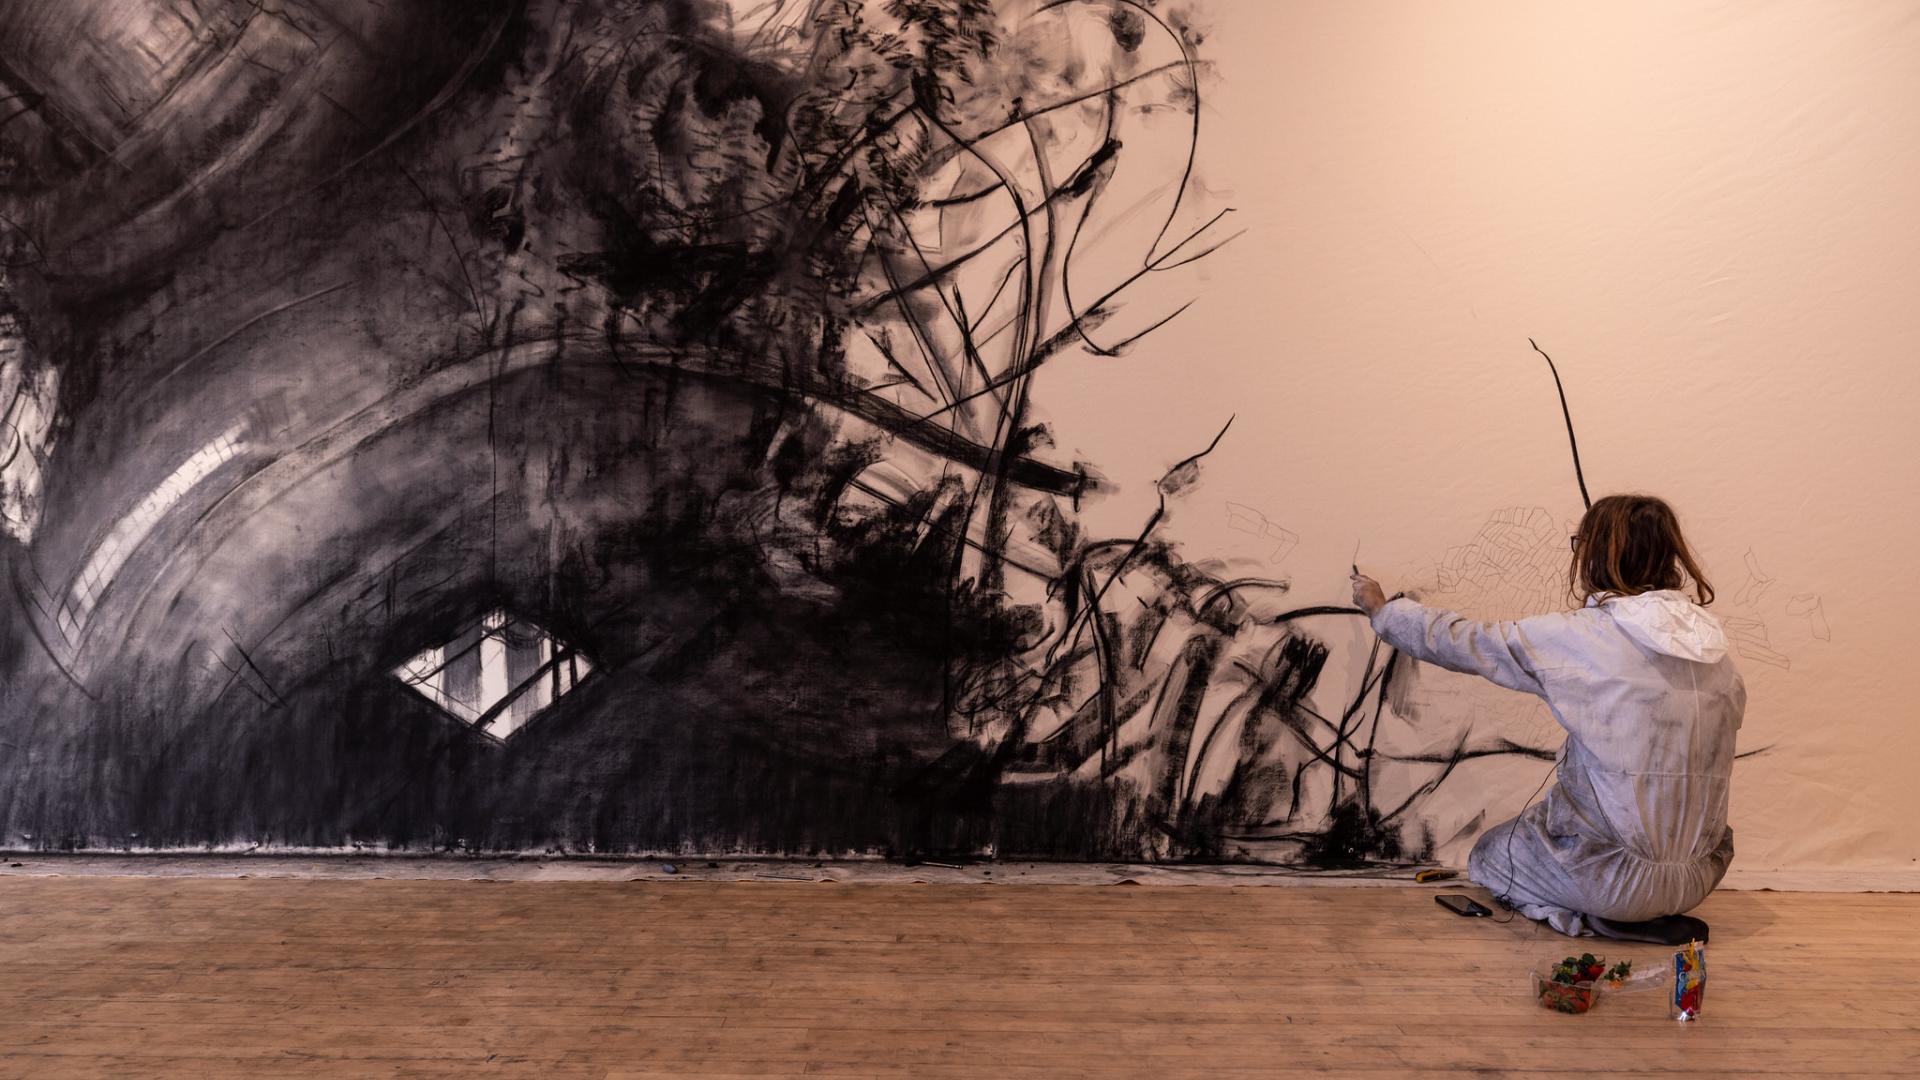 A person kneeling down observing their artwork after drawing on the wall with charcoal.